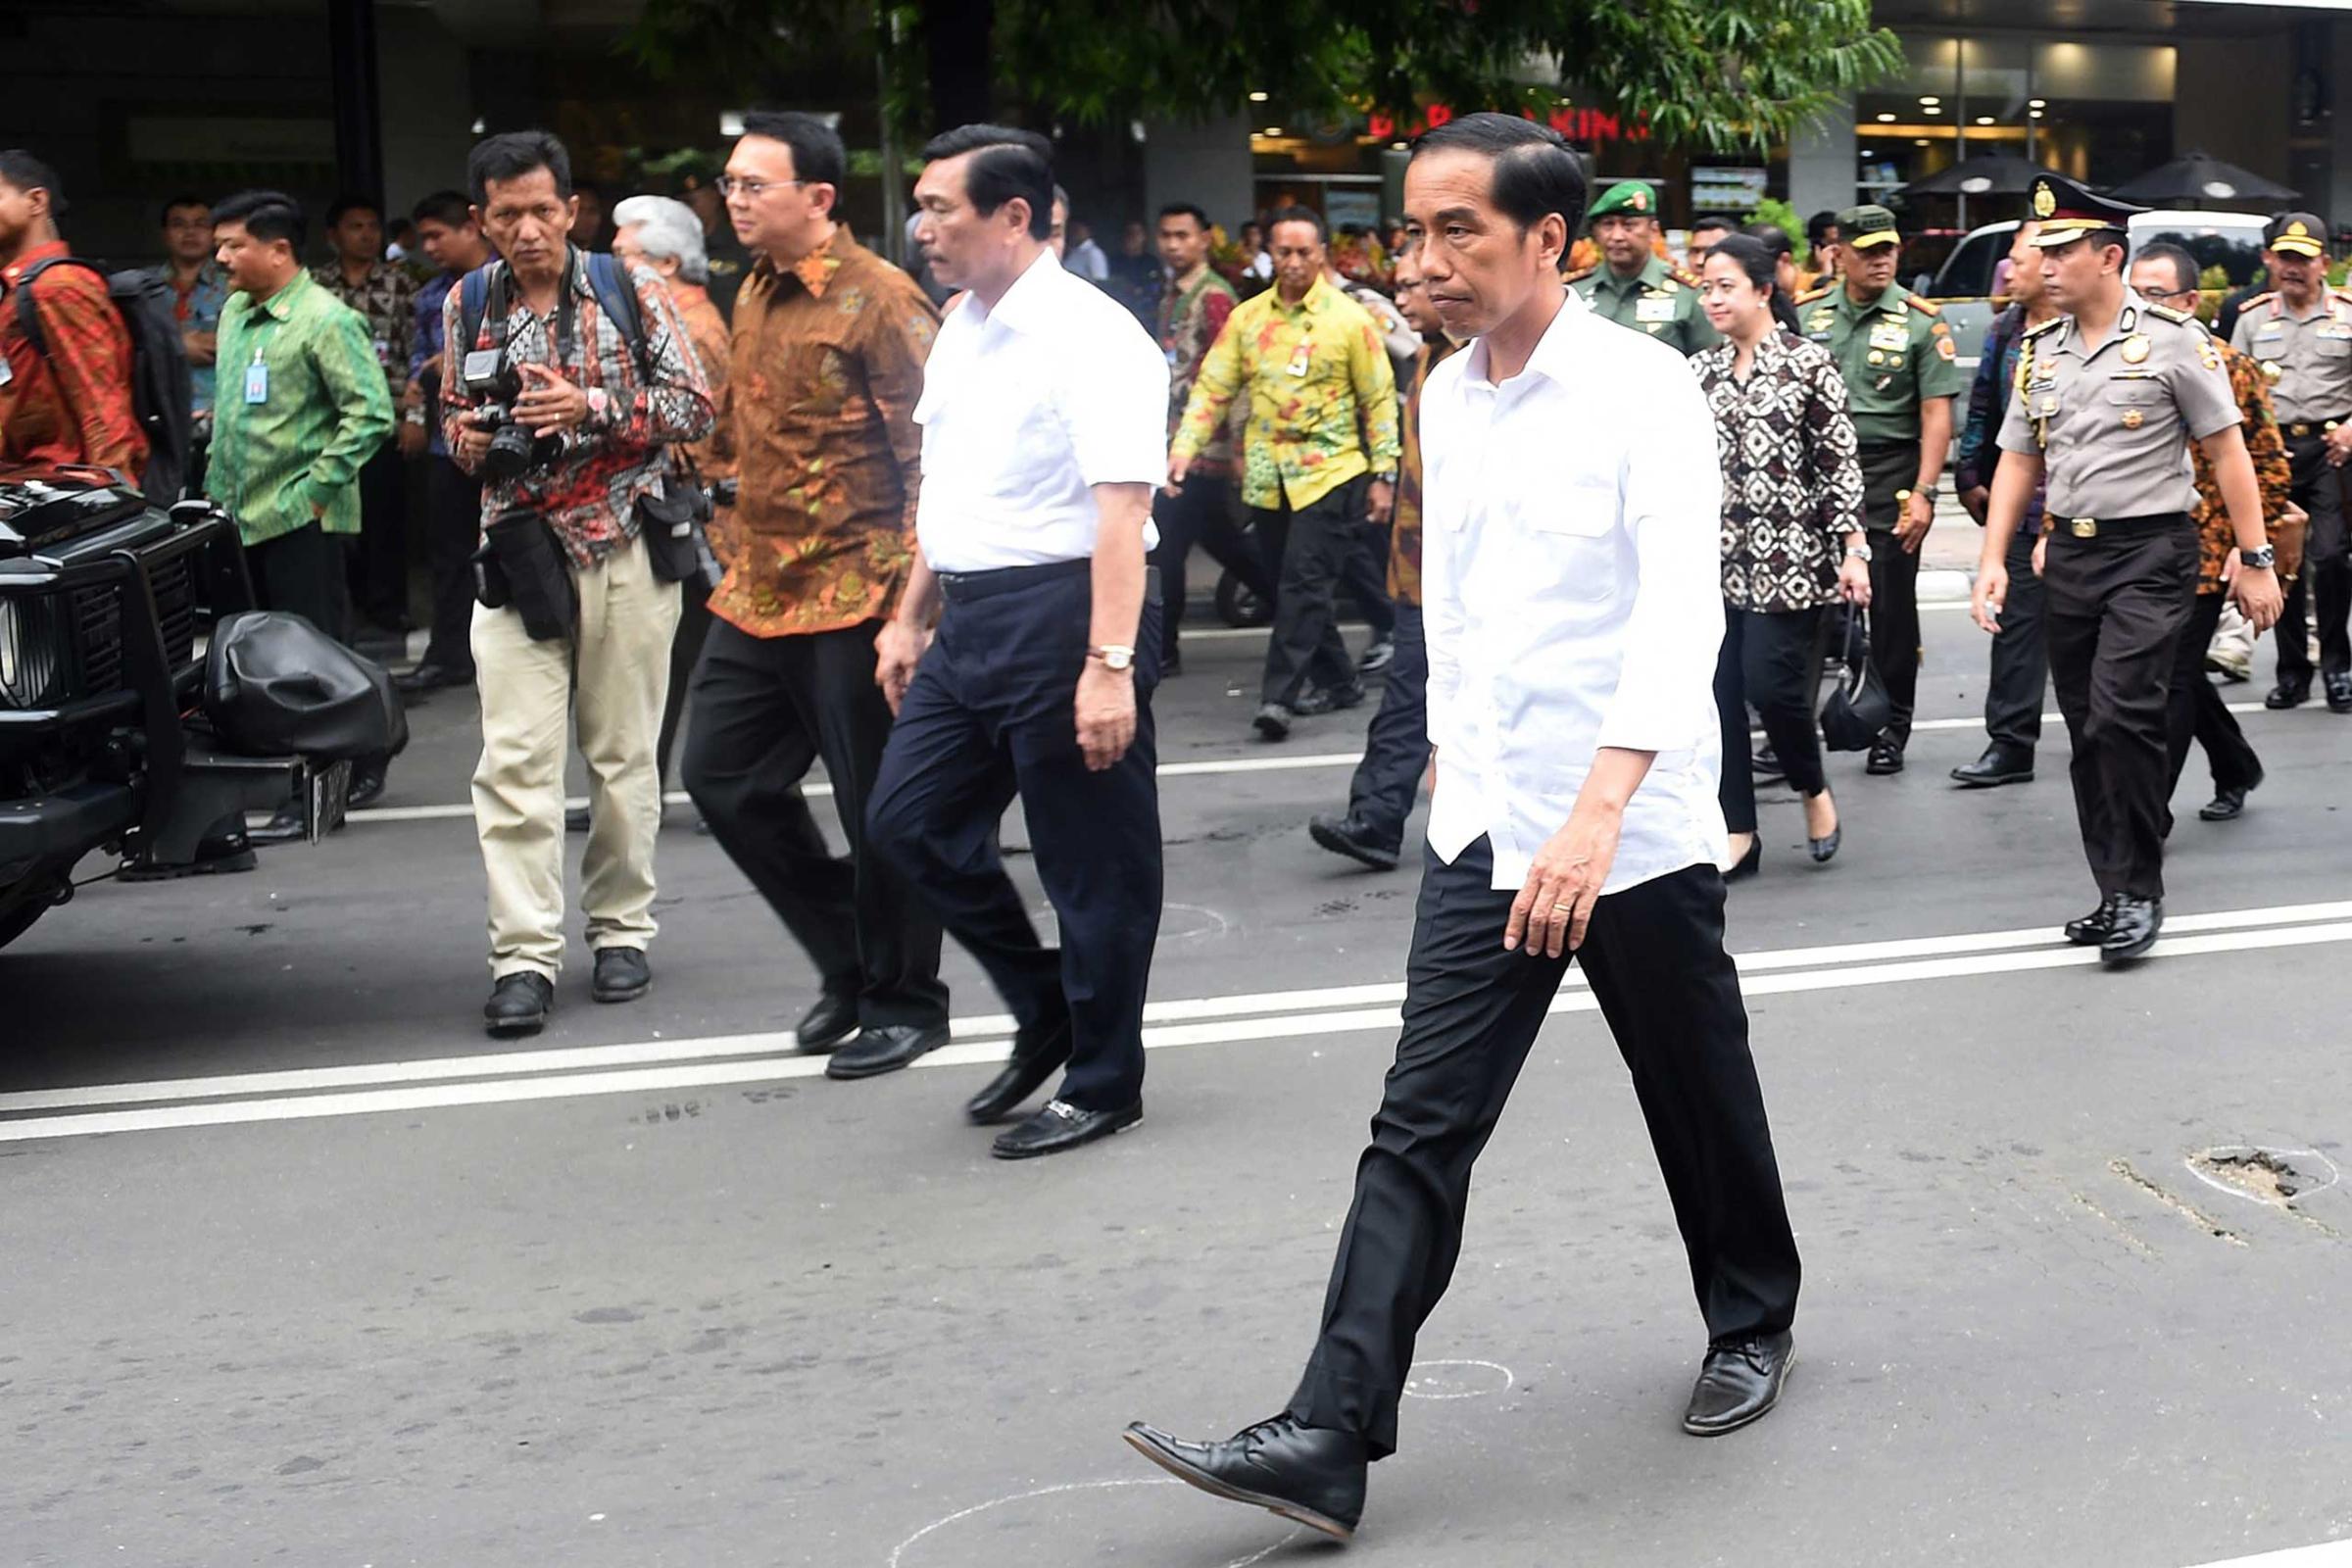 A handout picture provided by the Indonesian Presidential Palace shows President Joko Widodo visiting the blast site near a shopping mall in Jakarta, Indonesia, Jan. 14, 2016. At least seven people, including five suspected assailants, died in bomb blasts and gunfire in the attack.